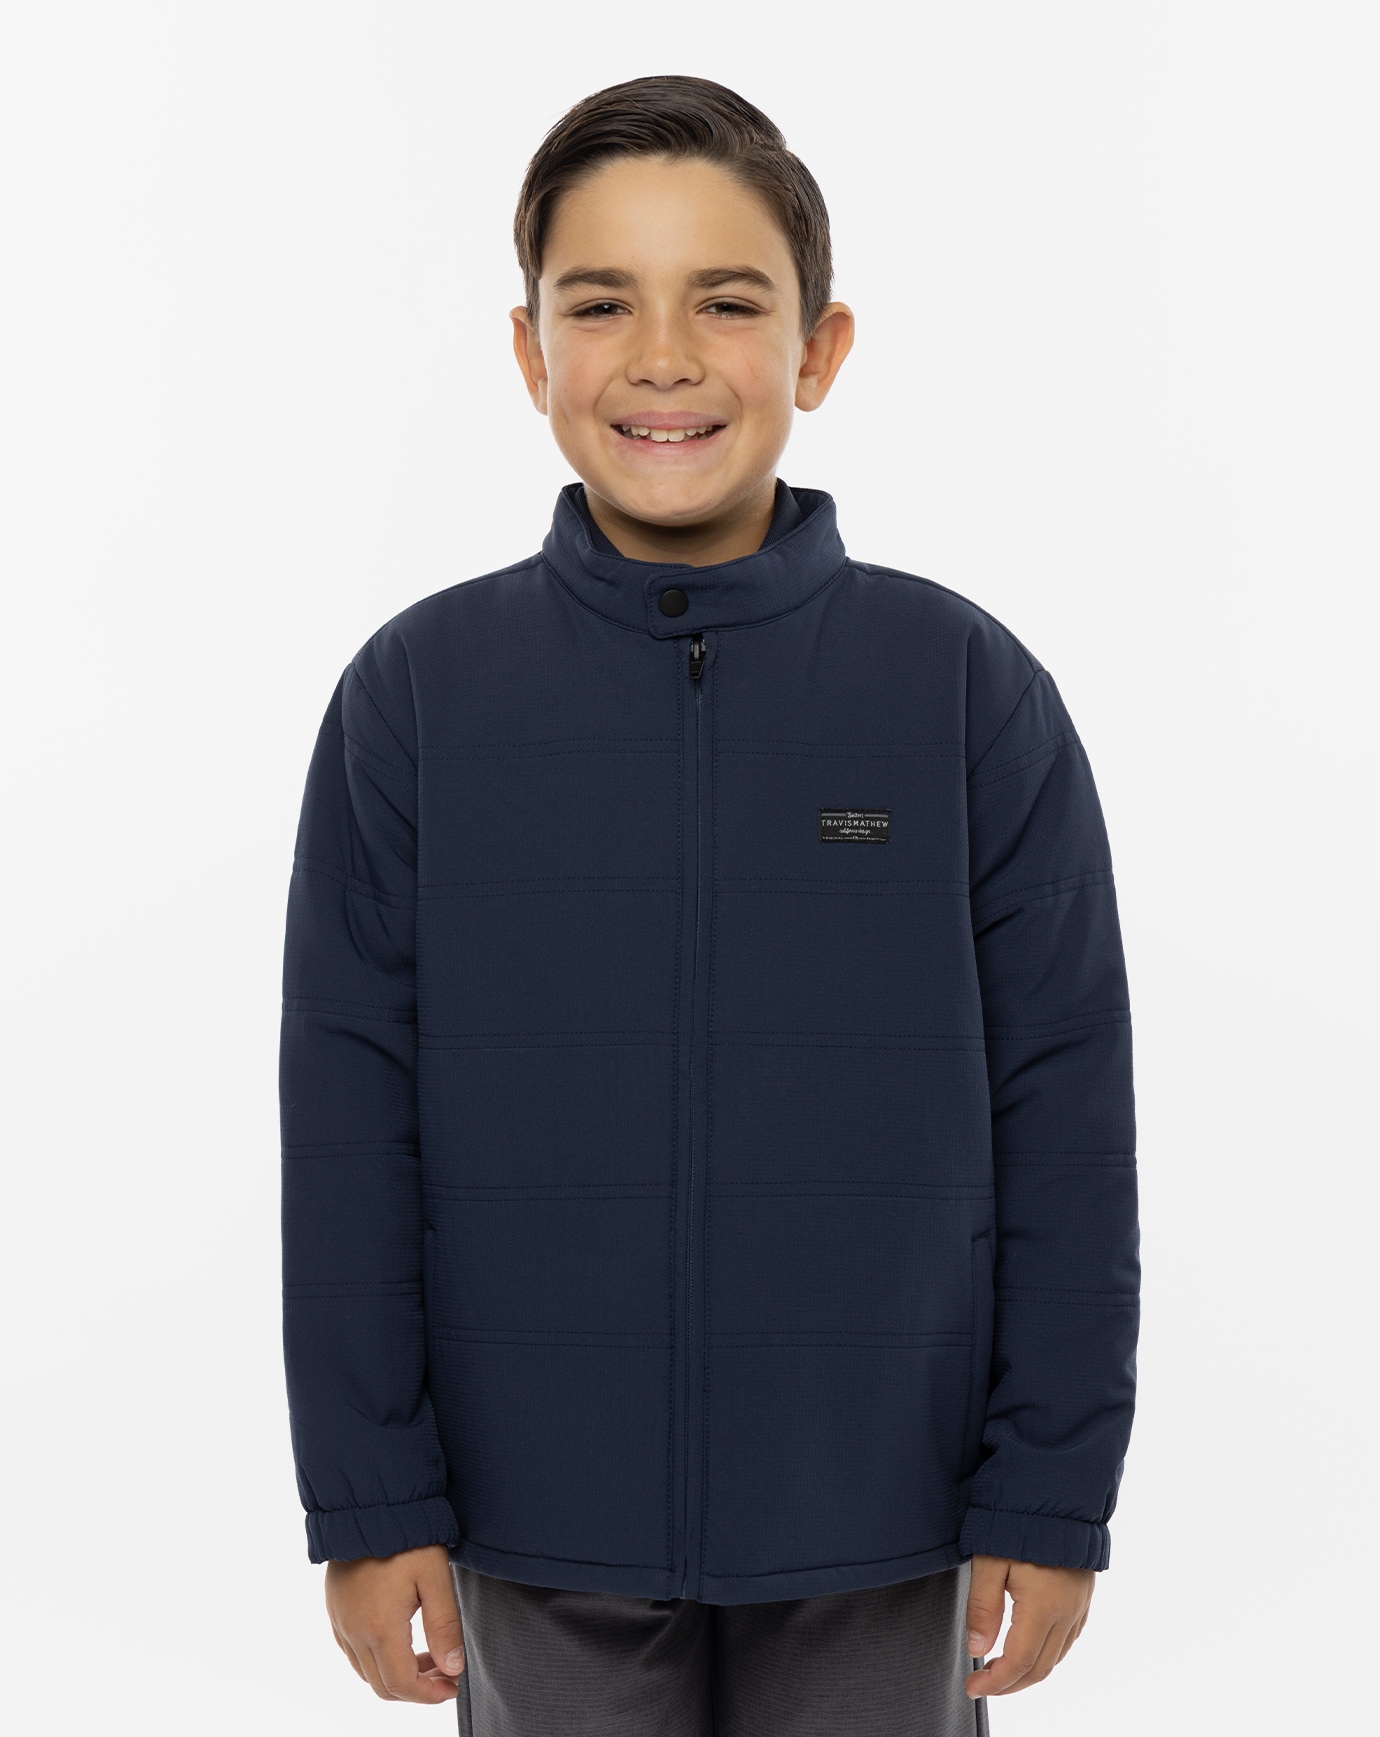 INTERLUDE YOUTH PUFFER JACKET_1BX125_4MIN_